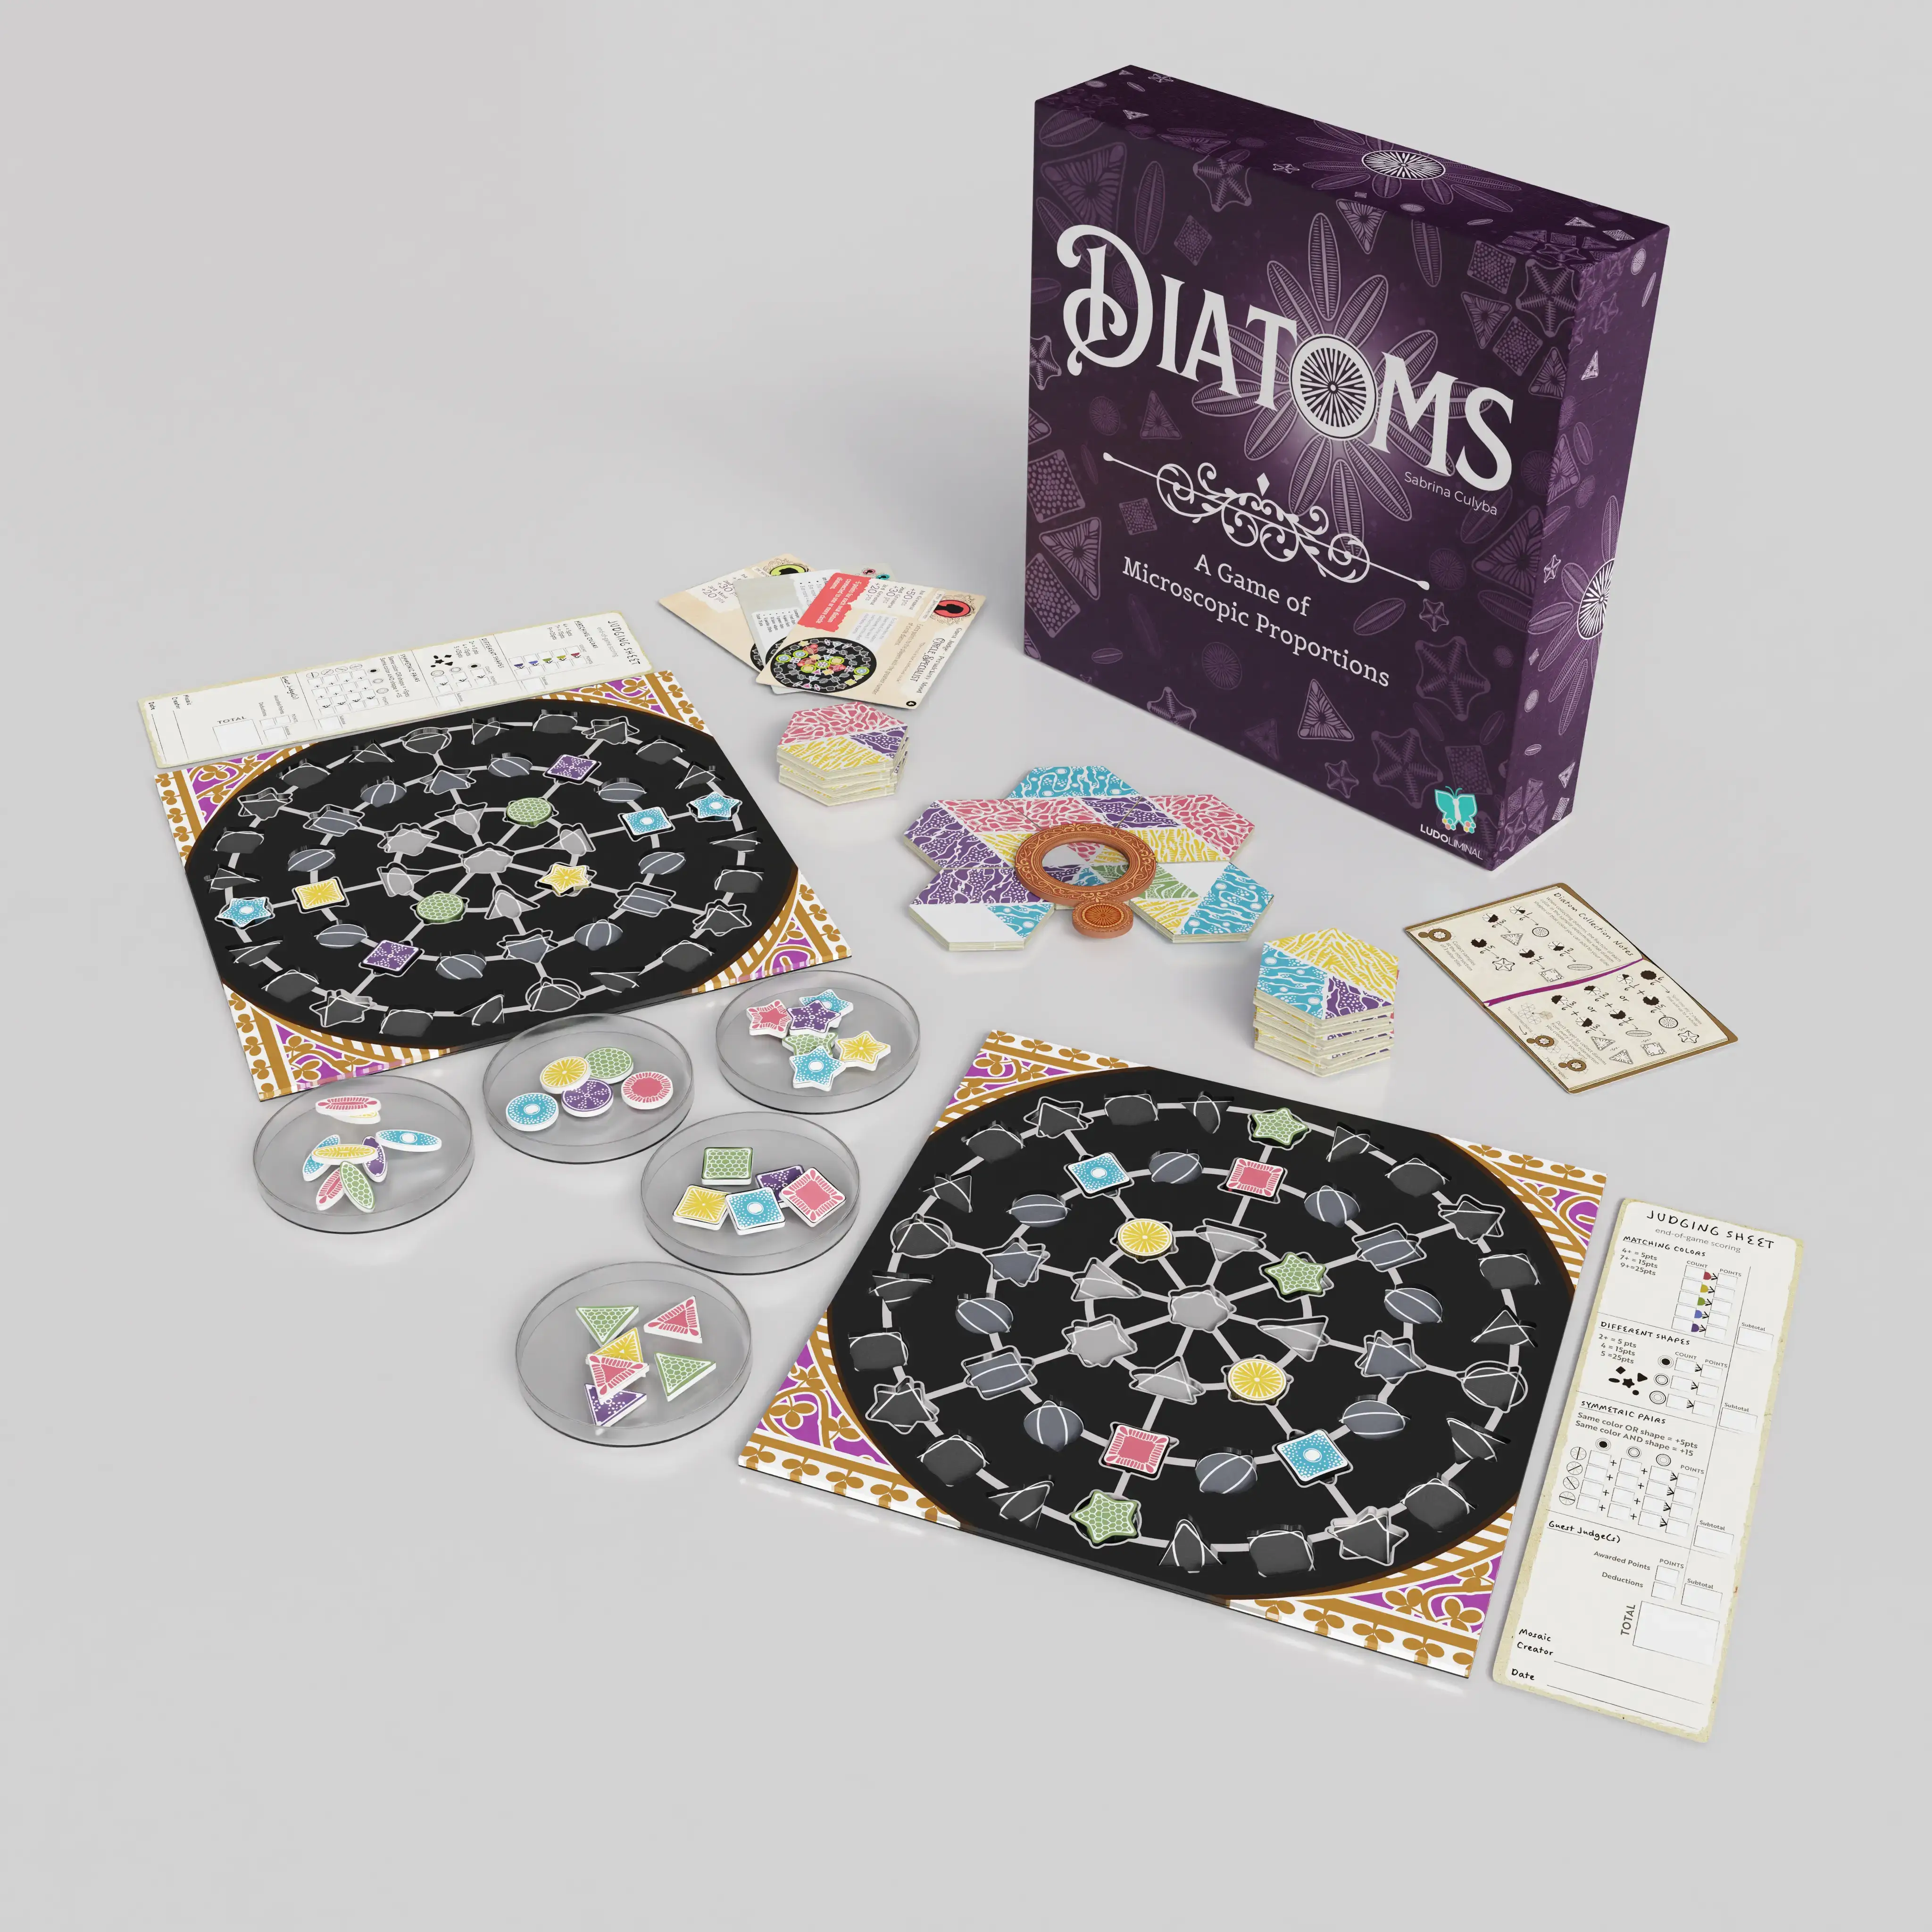 What's inside the Diatoms box? Glorious coloured tiles!